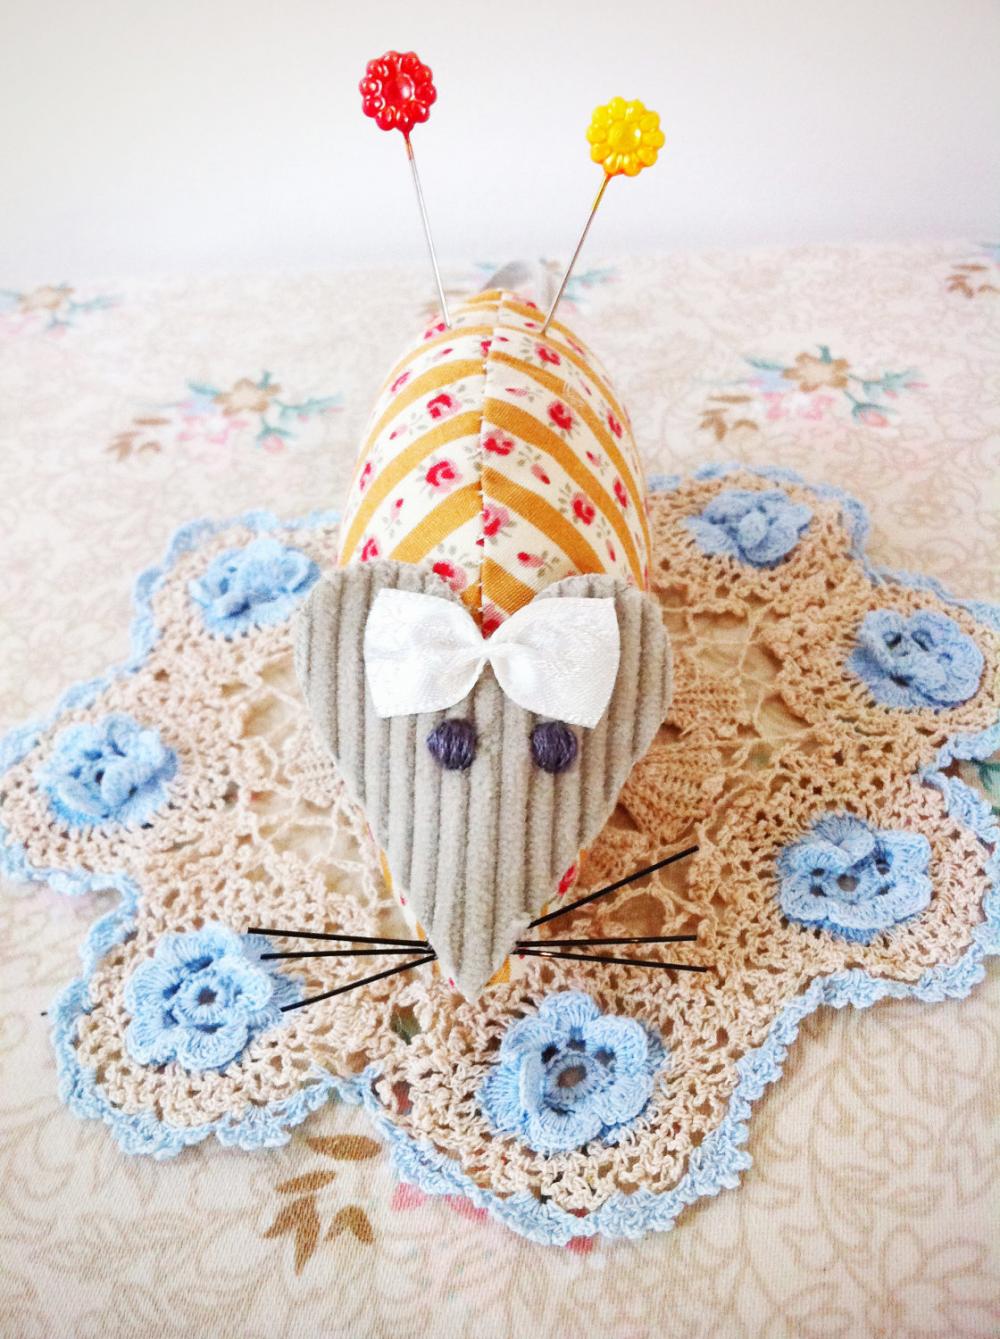 Vintage Style Mouse Pin Cushion With Mustard Fabric And Floral Pins